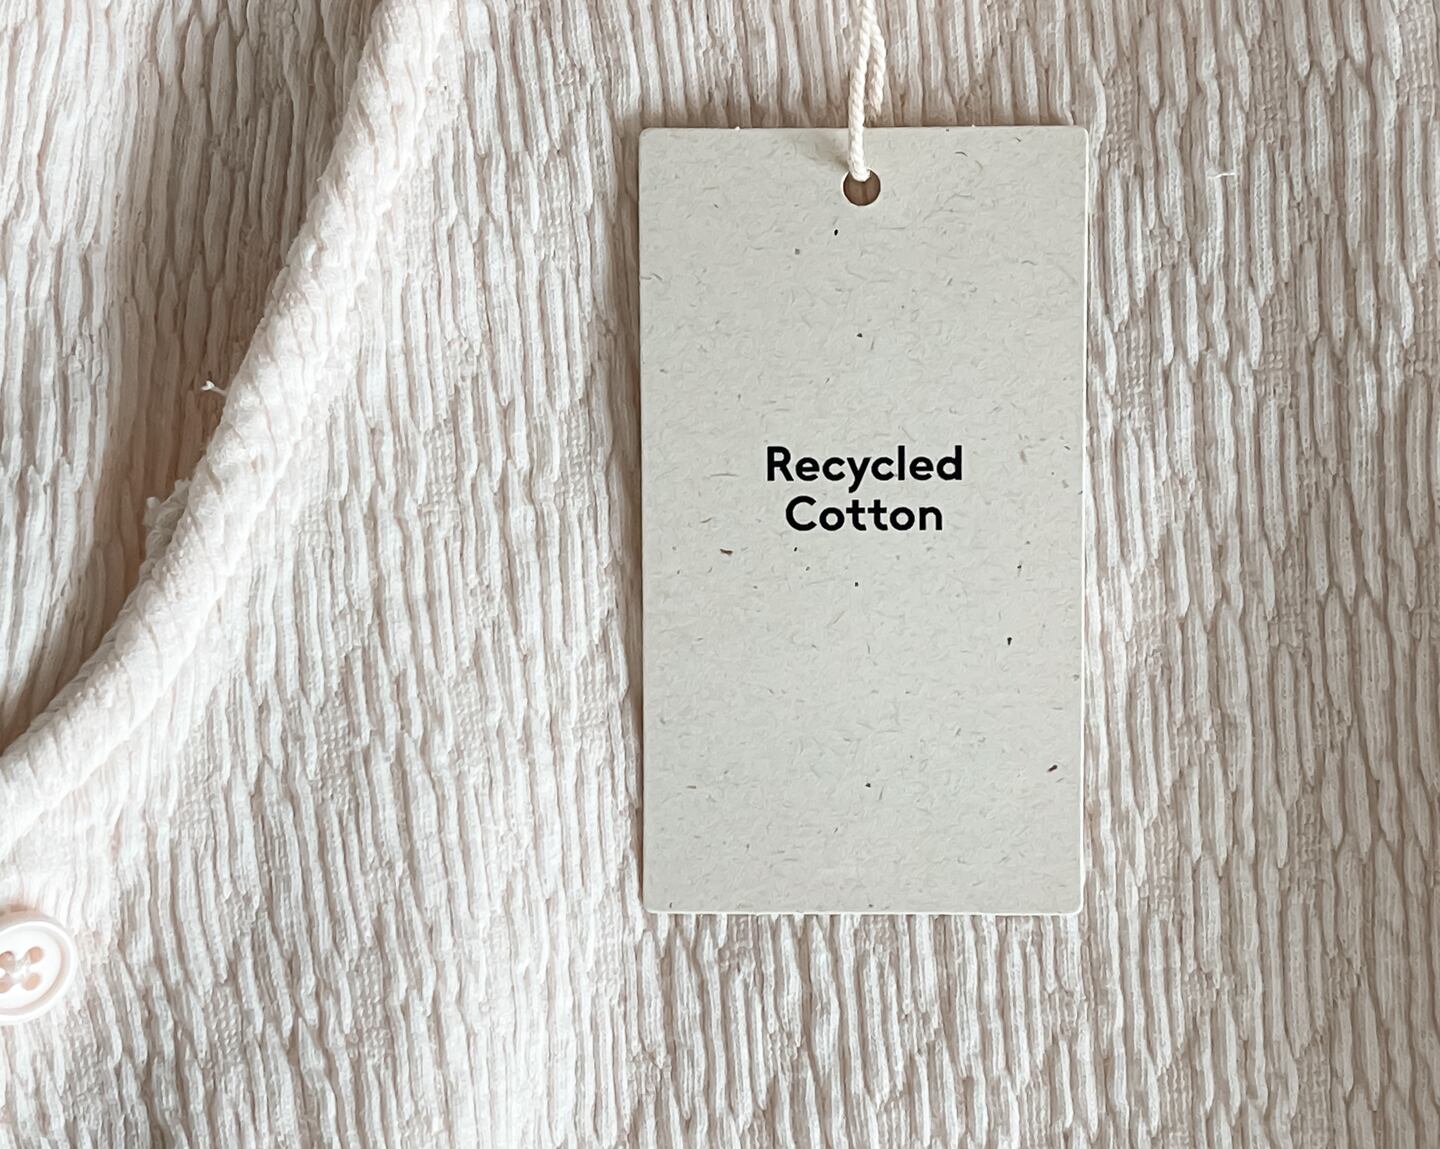 garment label for recycled cotton